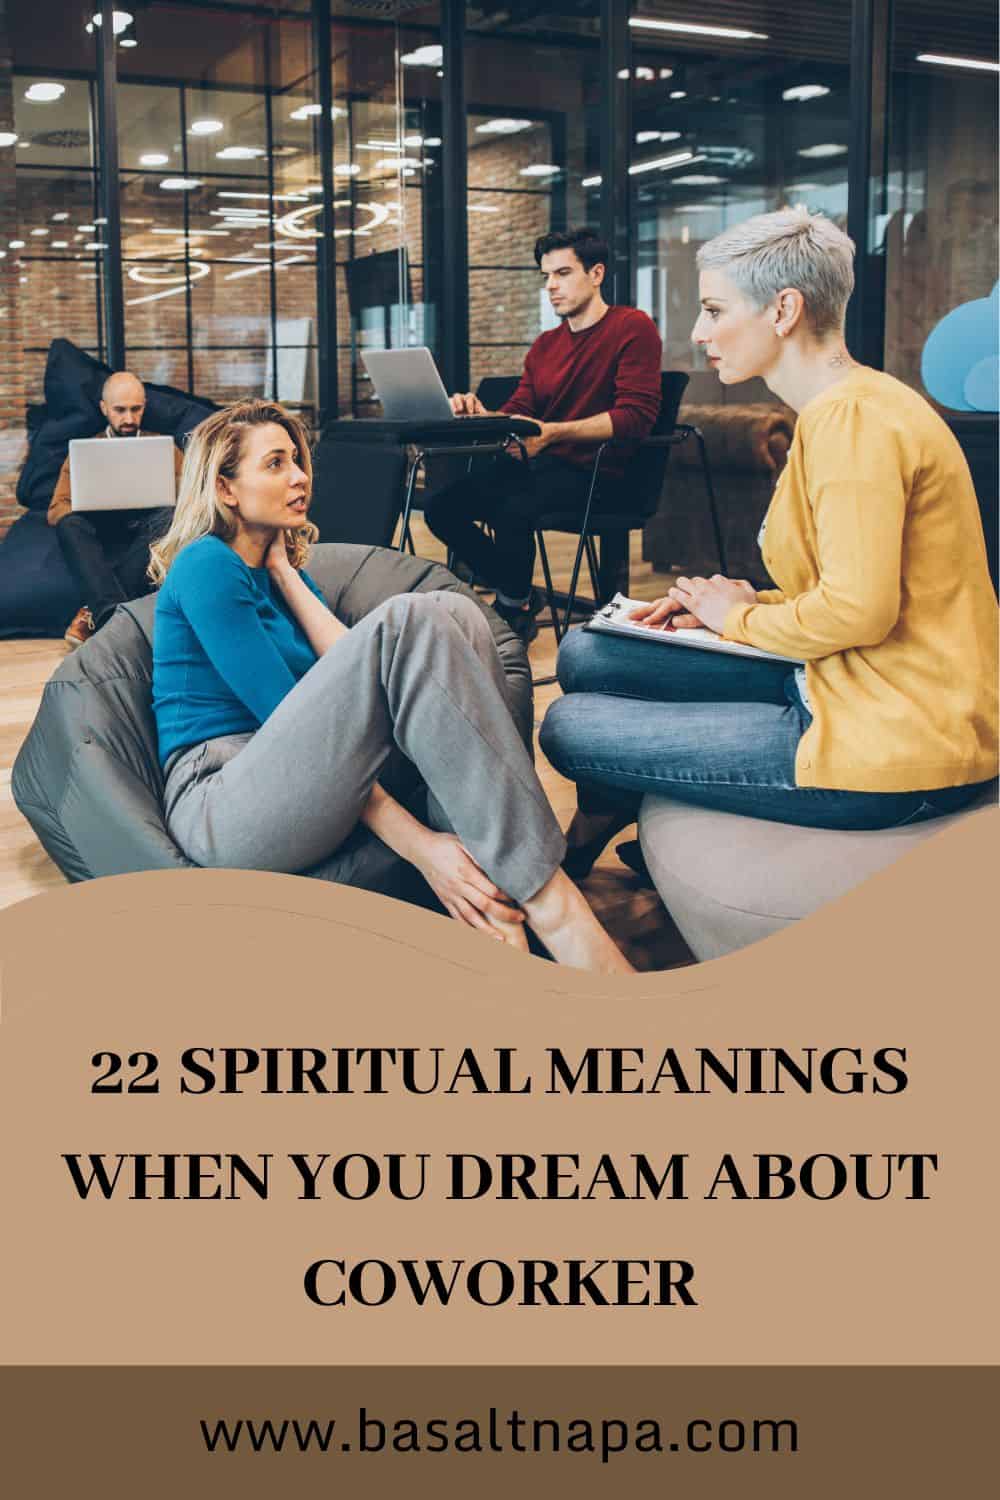 22 Spiritual Meanings When You Dream About Coworker